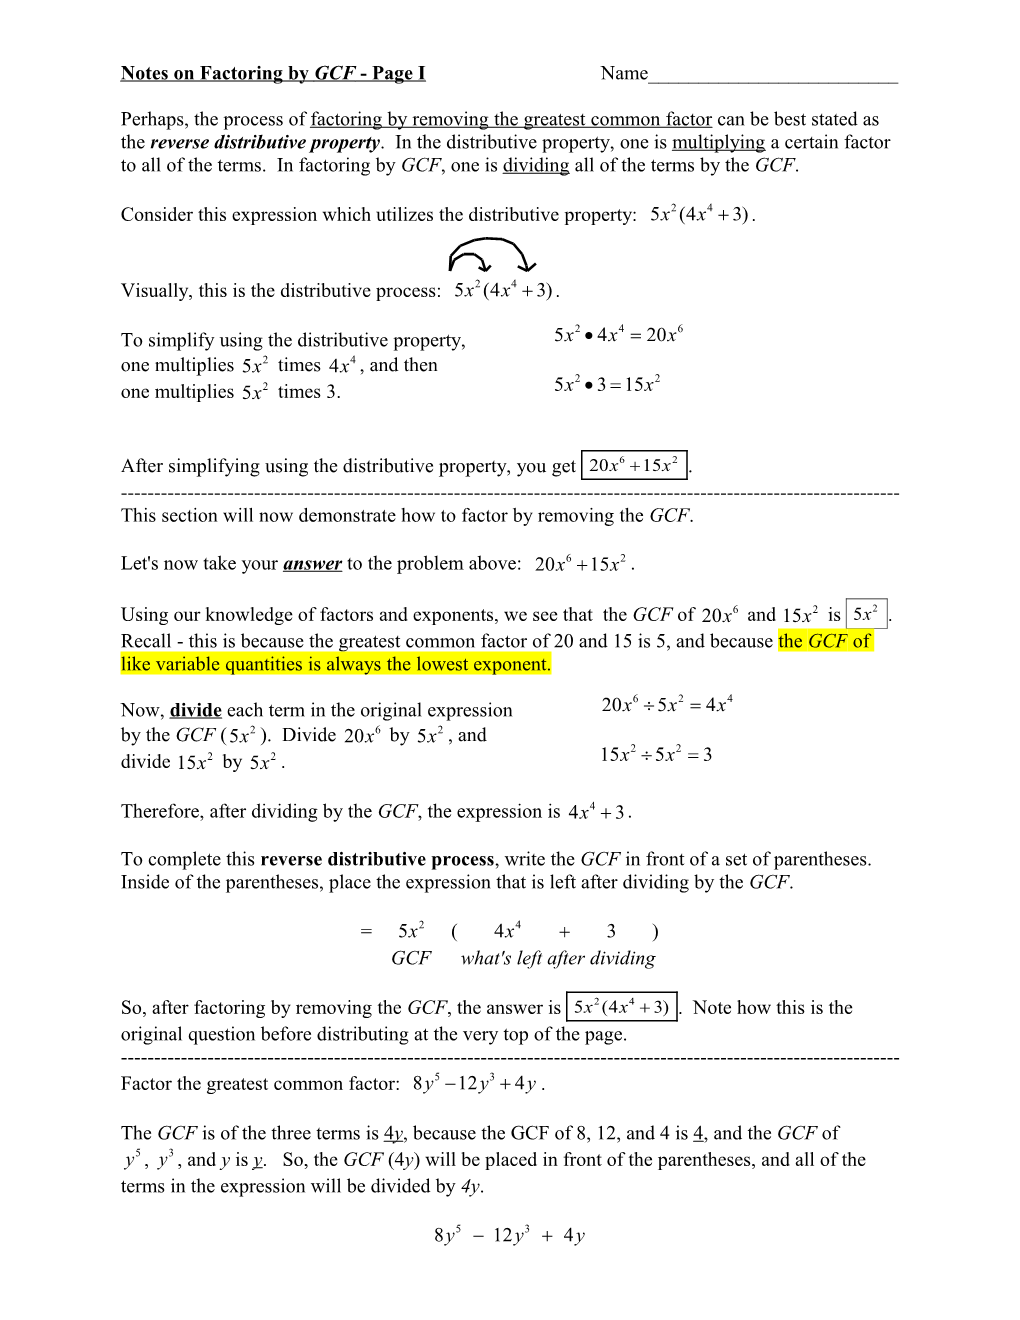 Factoring the Greatest Common Factor Worksheet